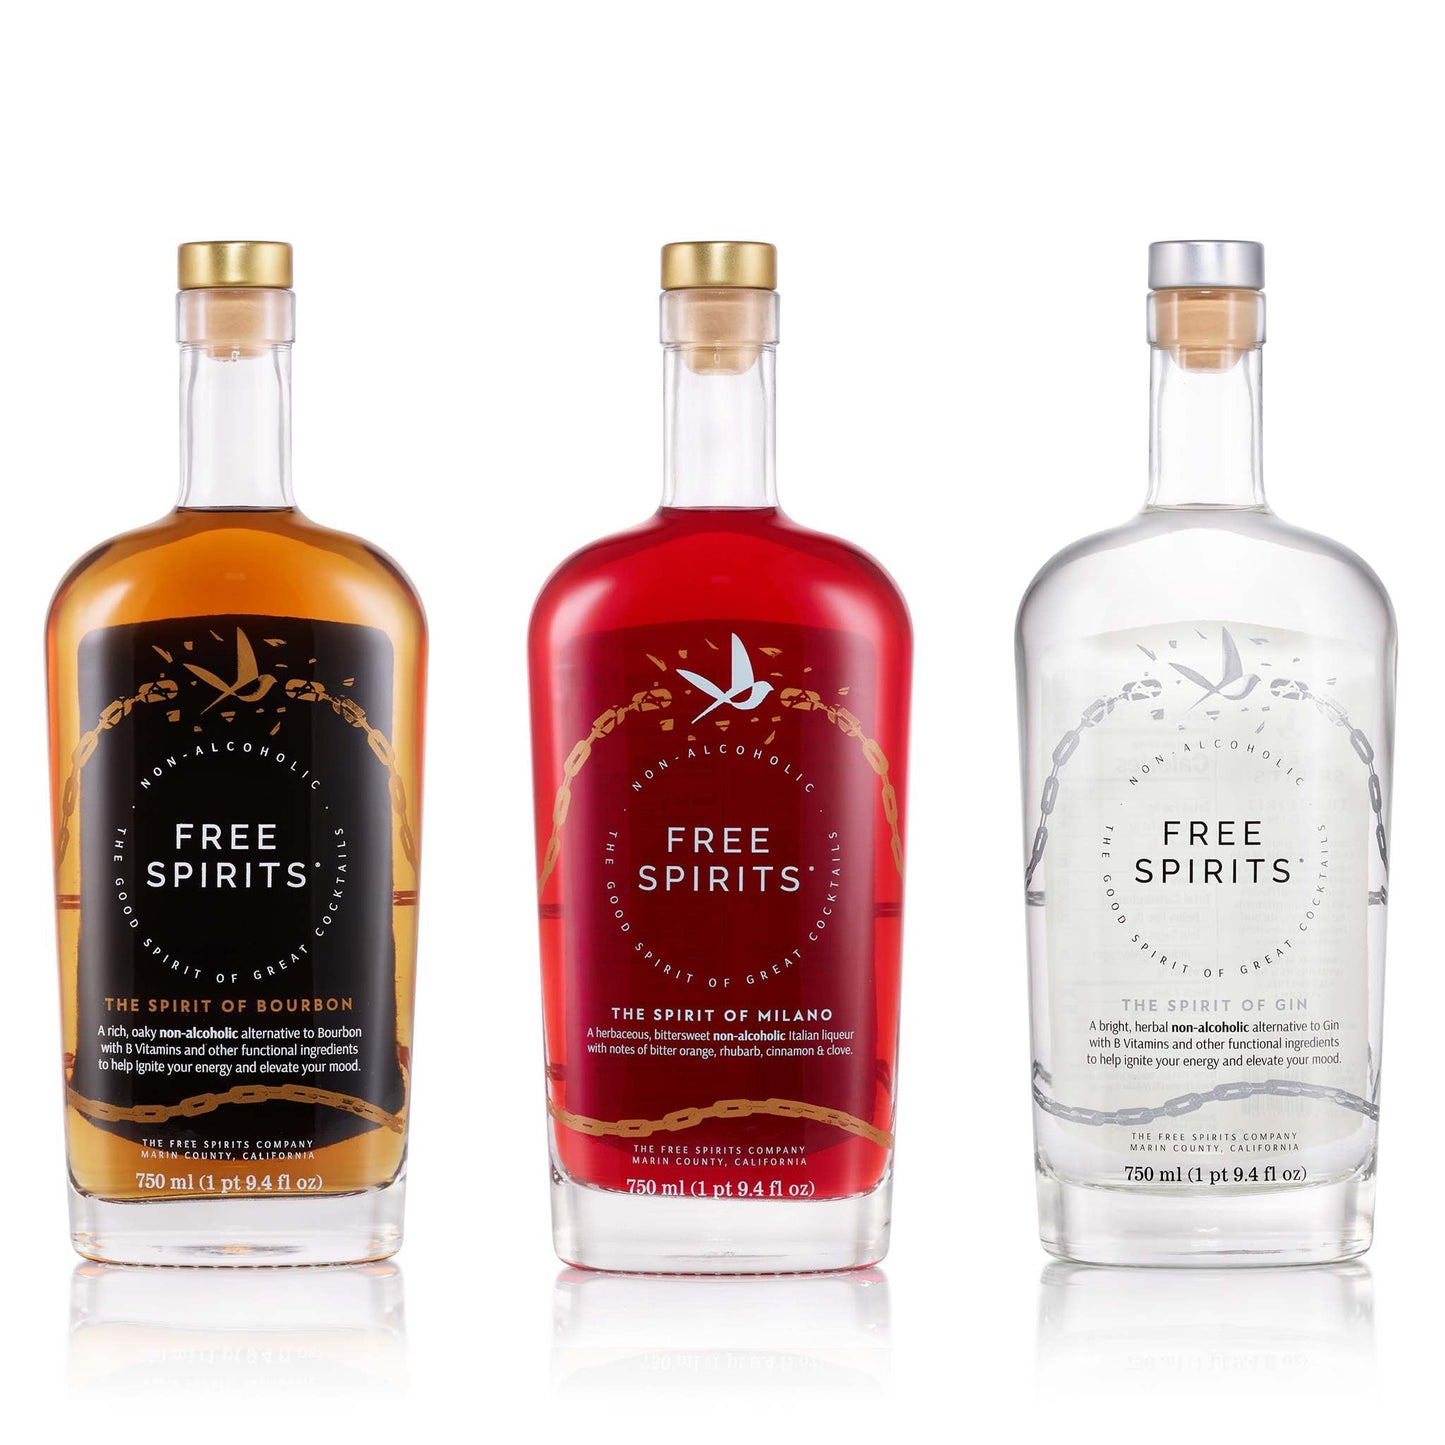 The Winter Spirit Bundle by The Free Spirits Company